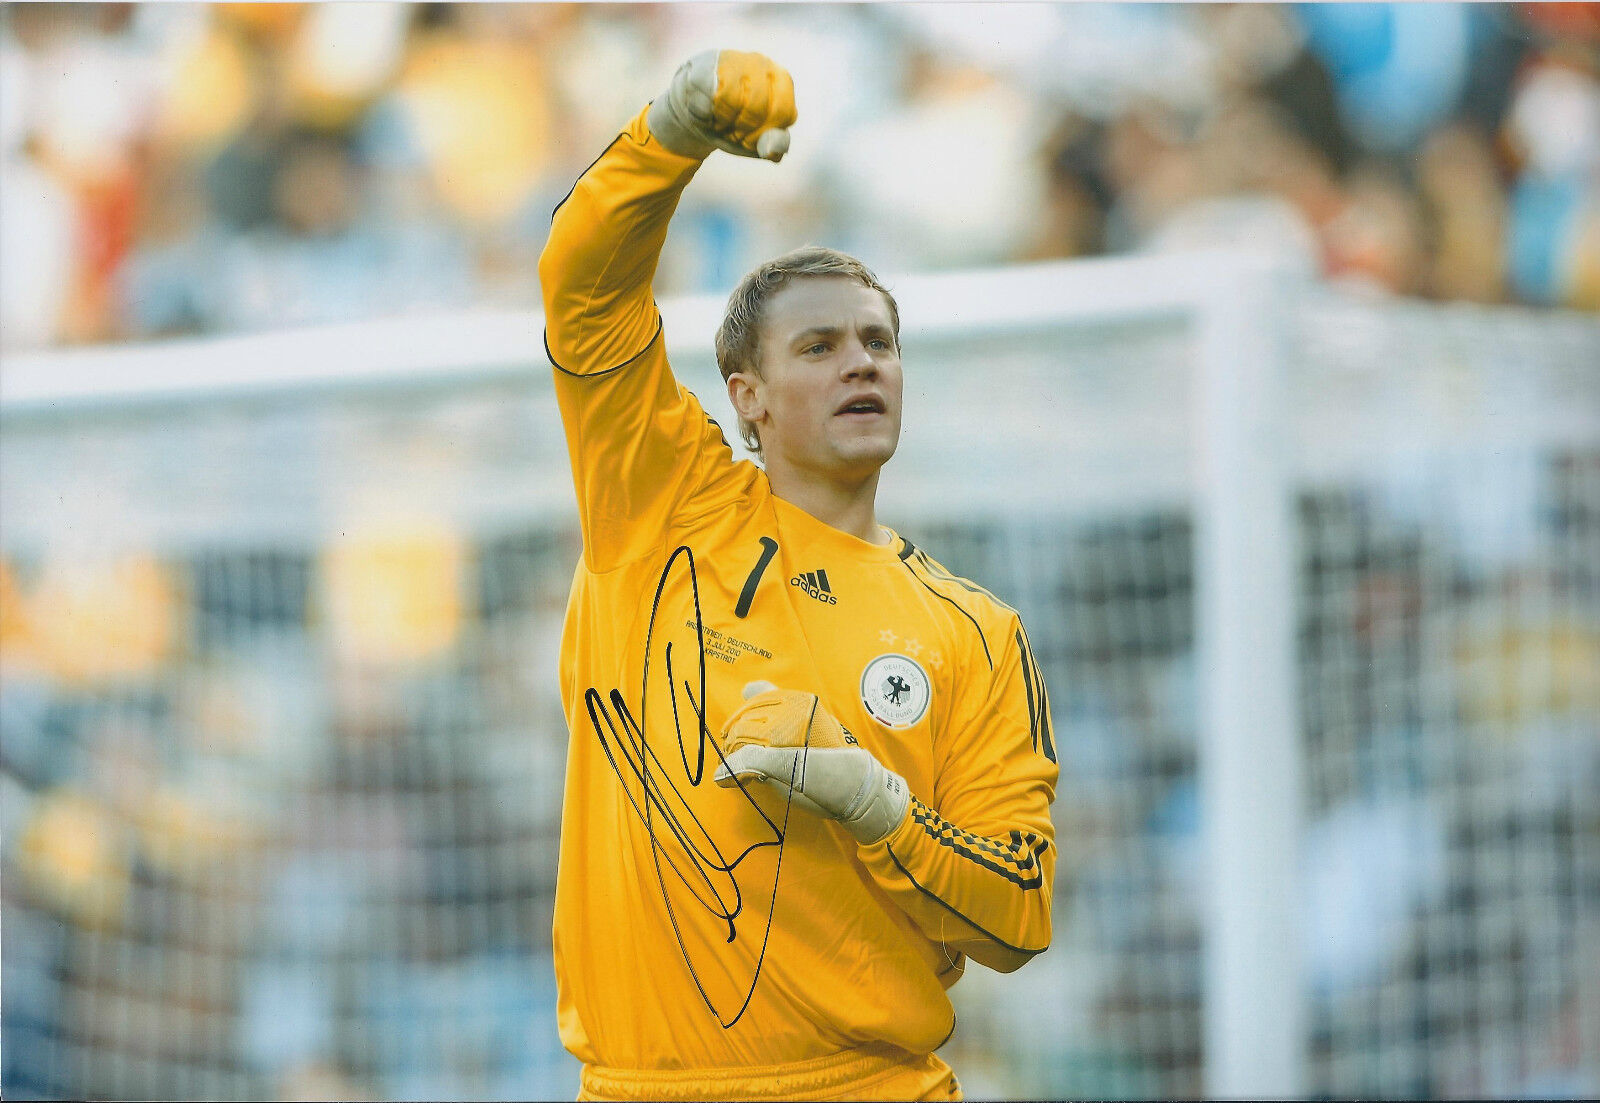 Manuel NEUER SIGNED Autograph 12x8 Photo Poster painting AFTAL German Goalkeeper Genuine